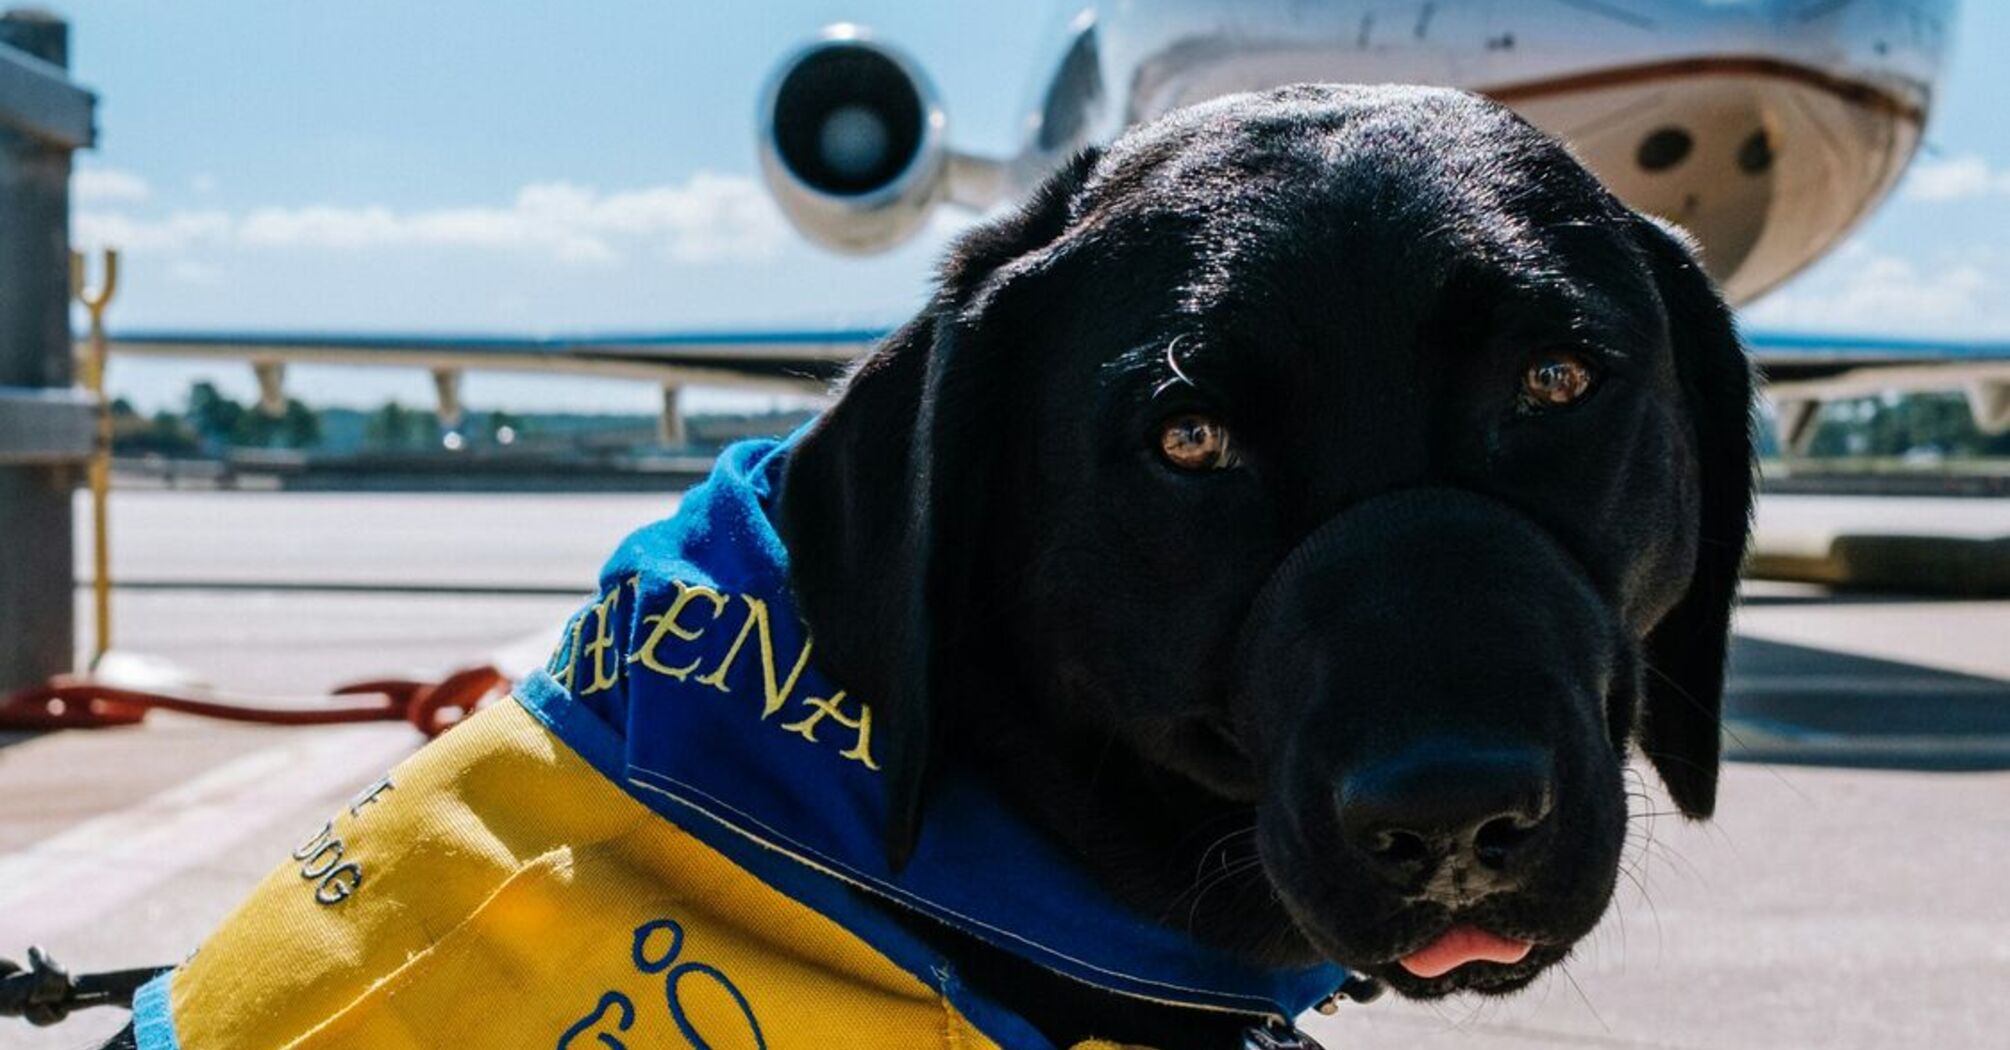 Service dog in yellow vest at airport with airplane in the background